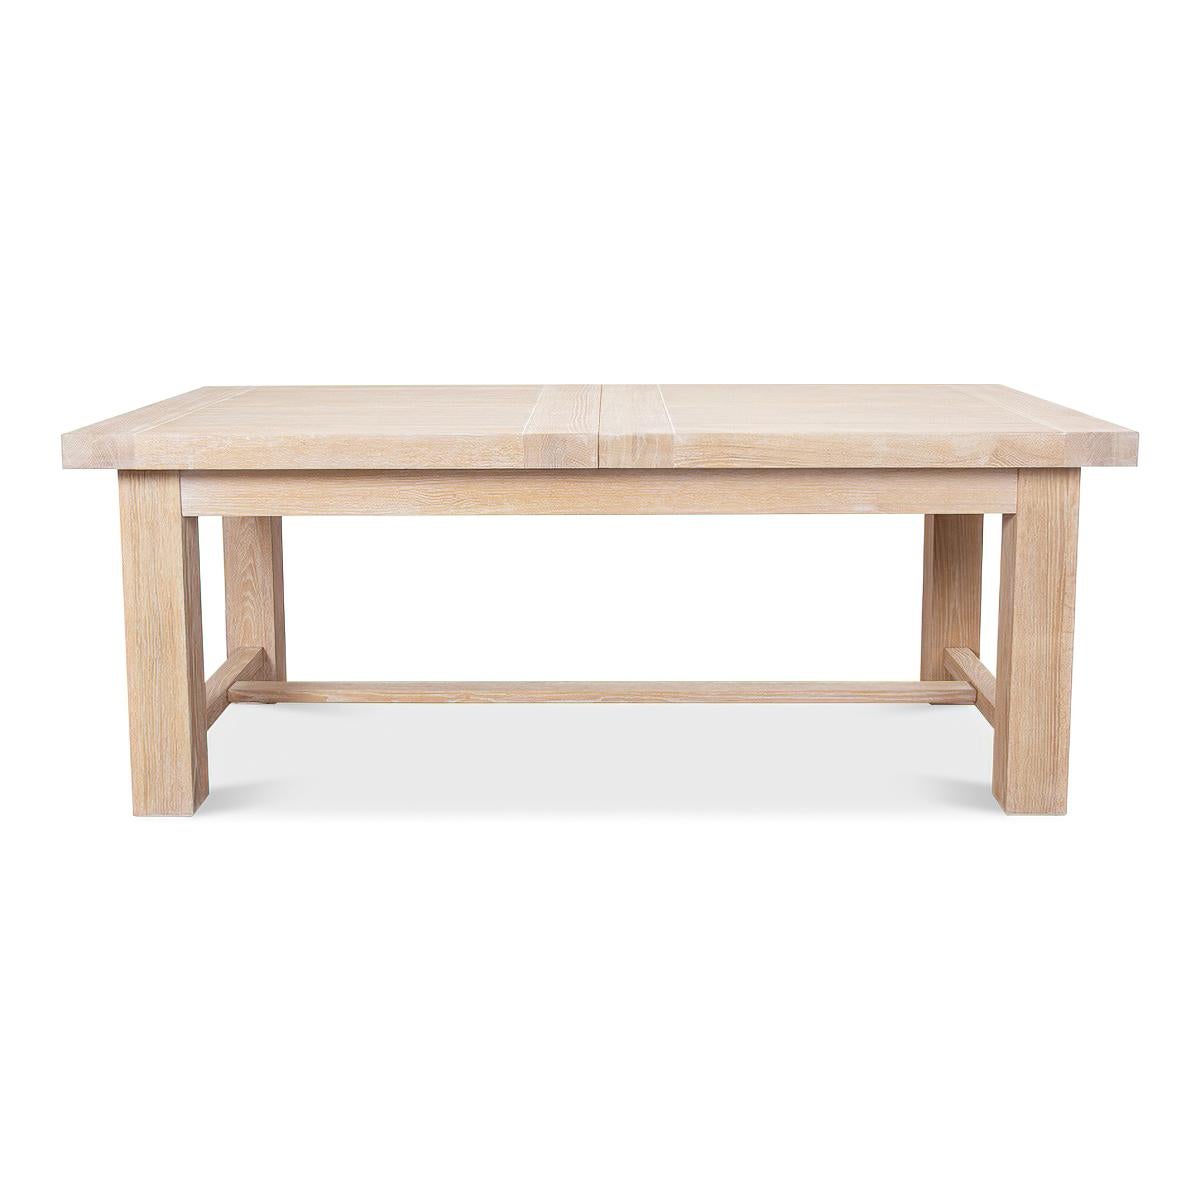 A Swedish modern oak extension dining table. This contemporary bold thick top oak dining table is raised on a substantial base with an H stretcher. 

Open dimensions: 110